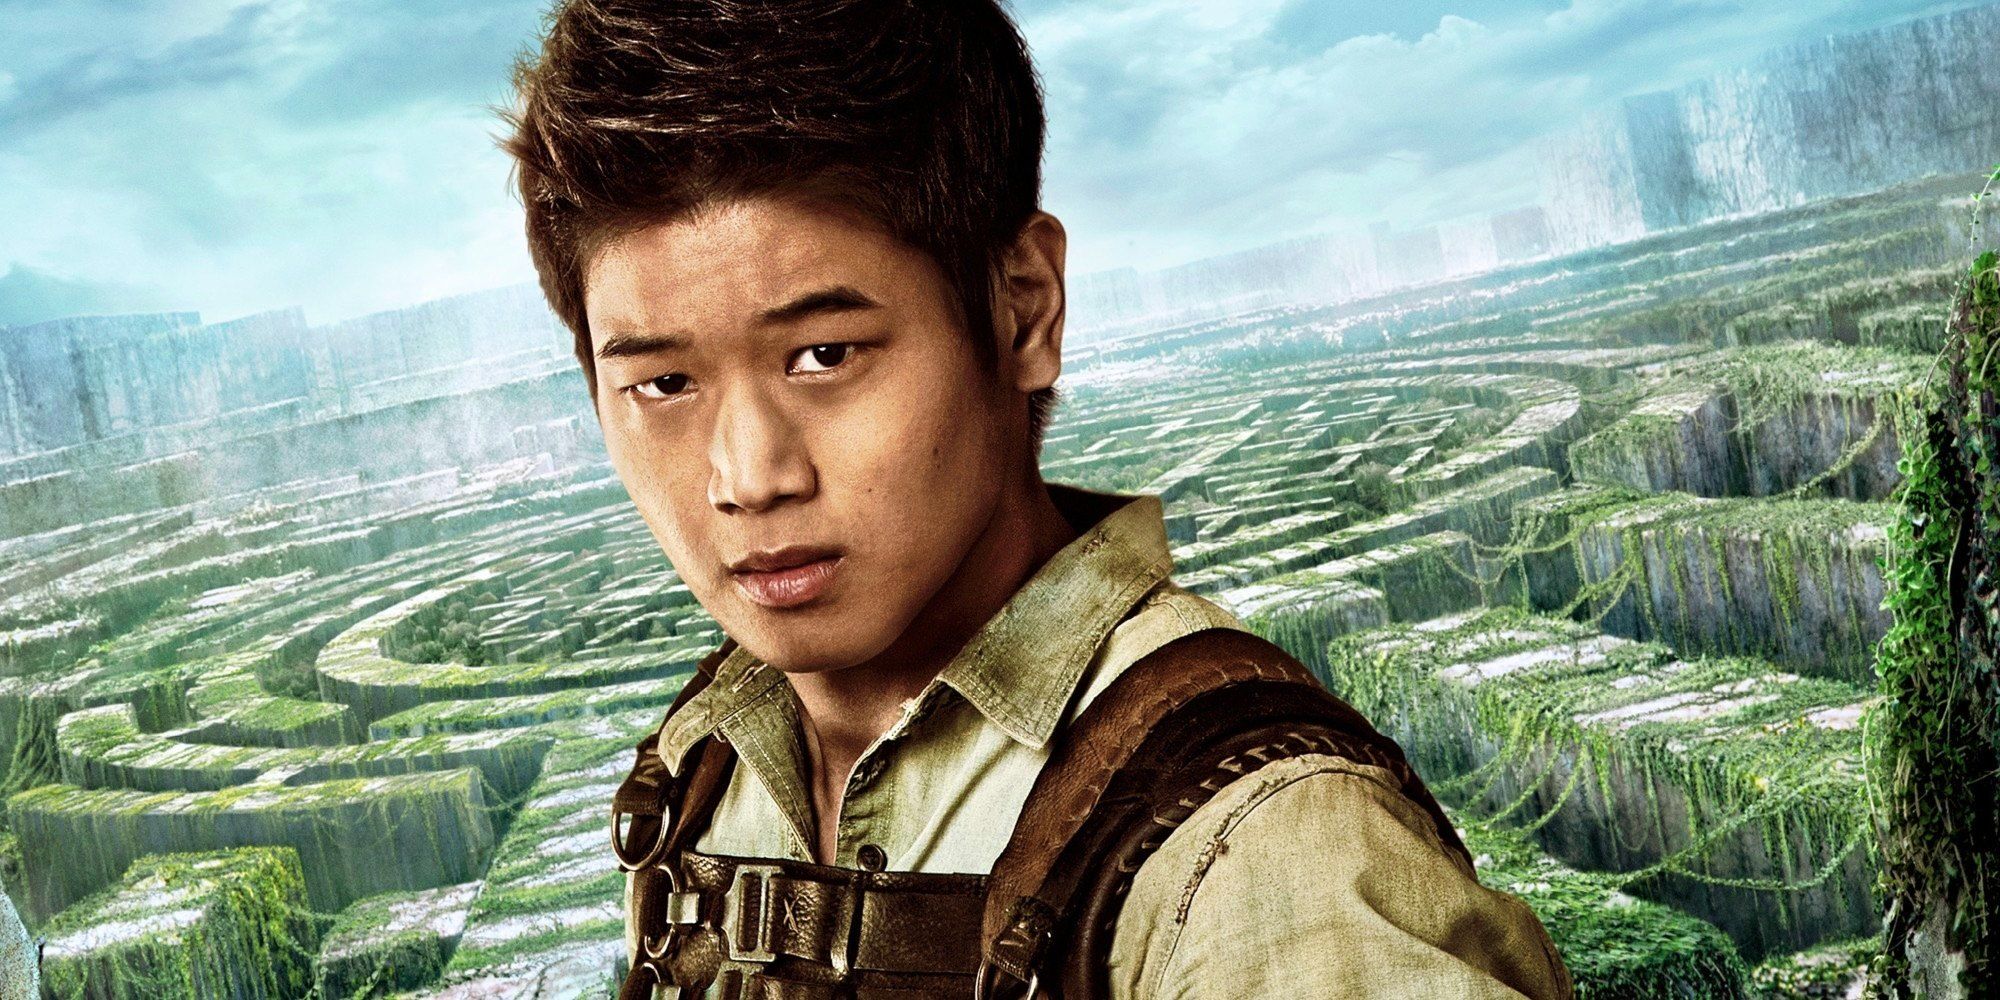 The Maze Runner' Finale 'The Death Cure' Won't Be Split Into Two Movies